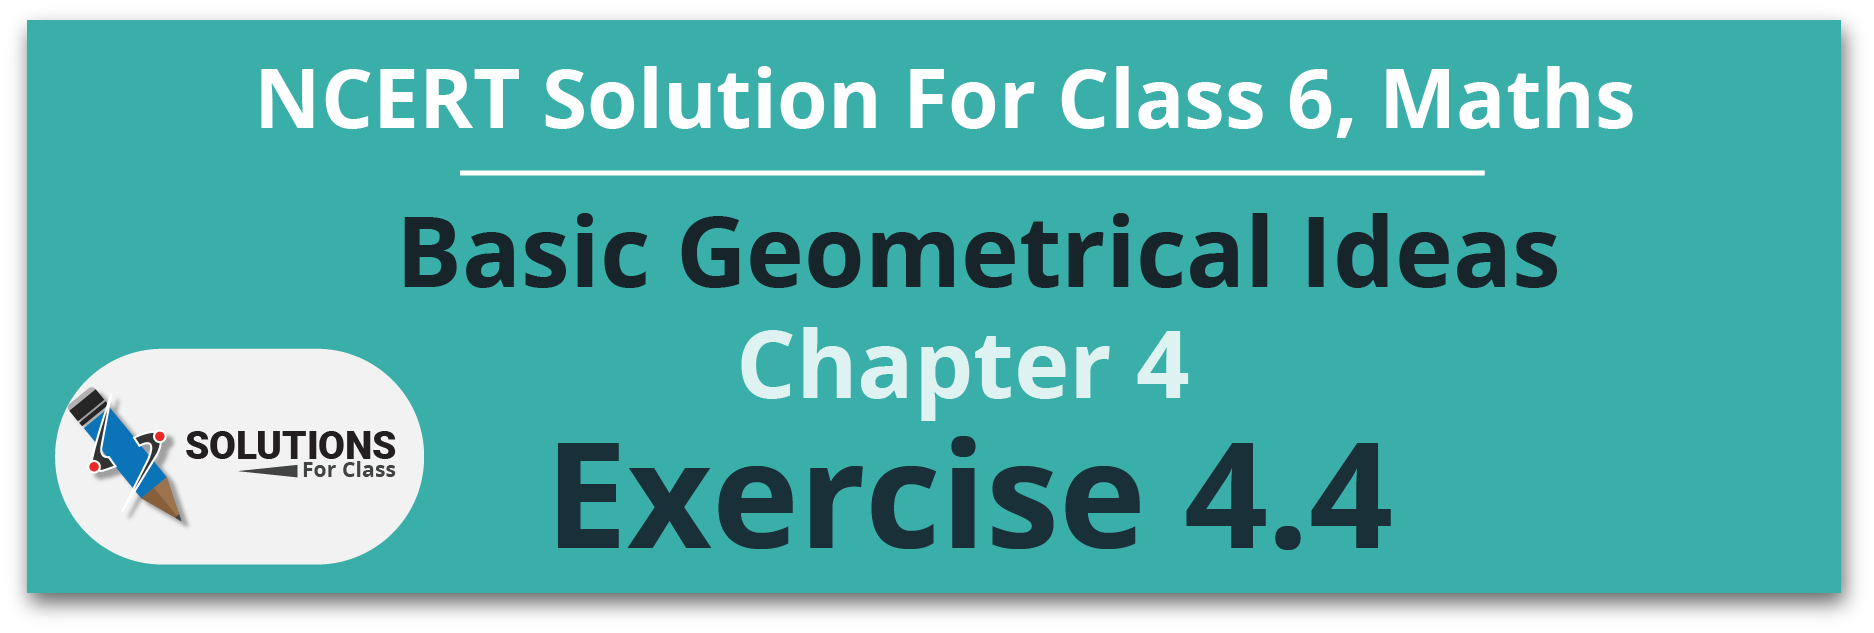 NCERT Solutions For Class 6 Maths, Chapter 4, Basic Geometrical Ideas, Exercise 4.4